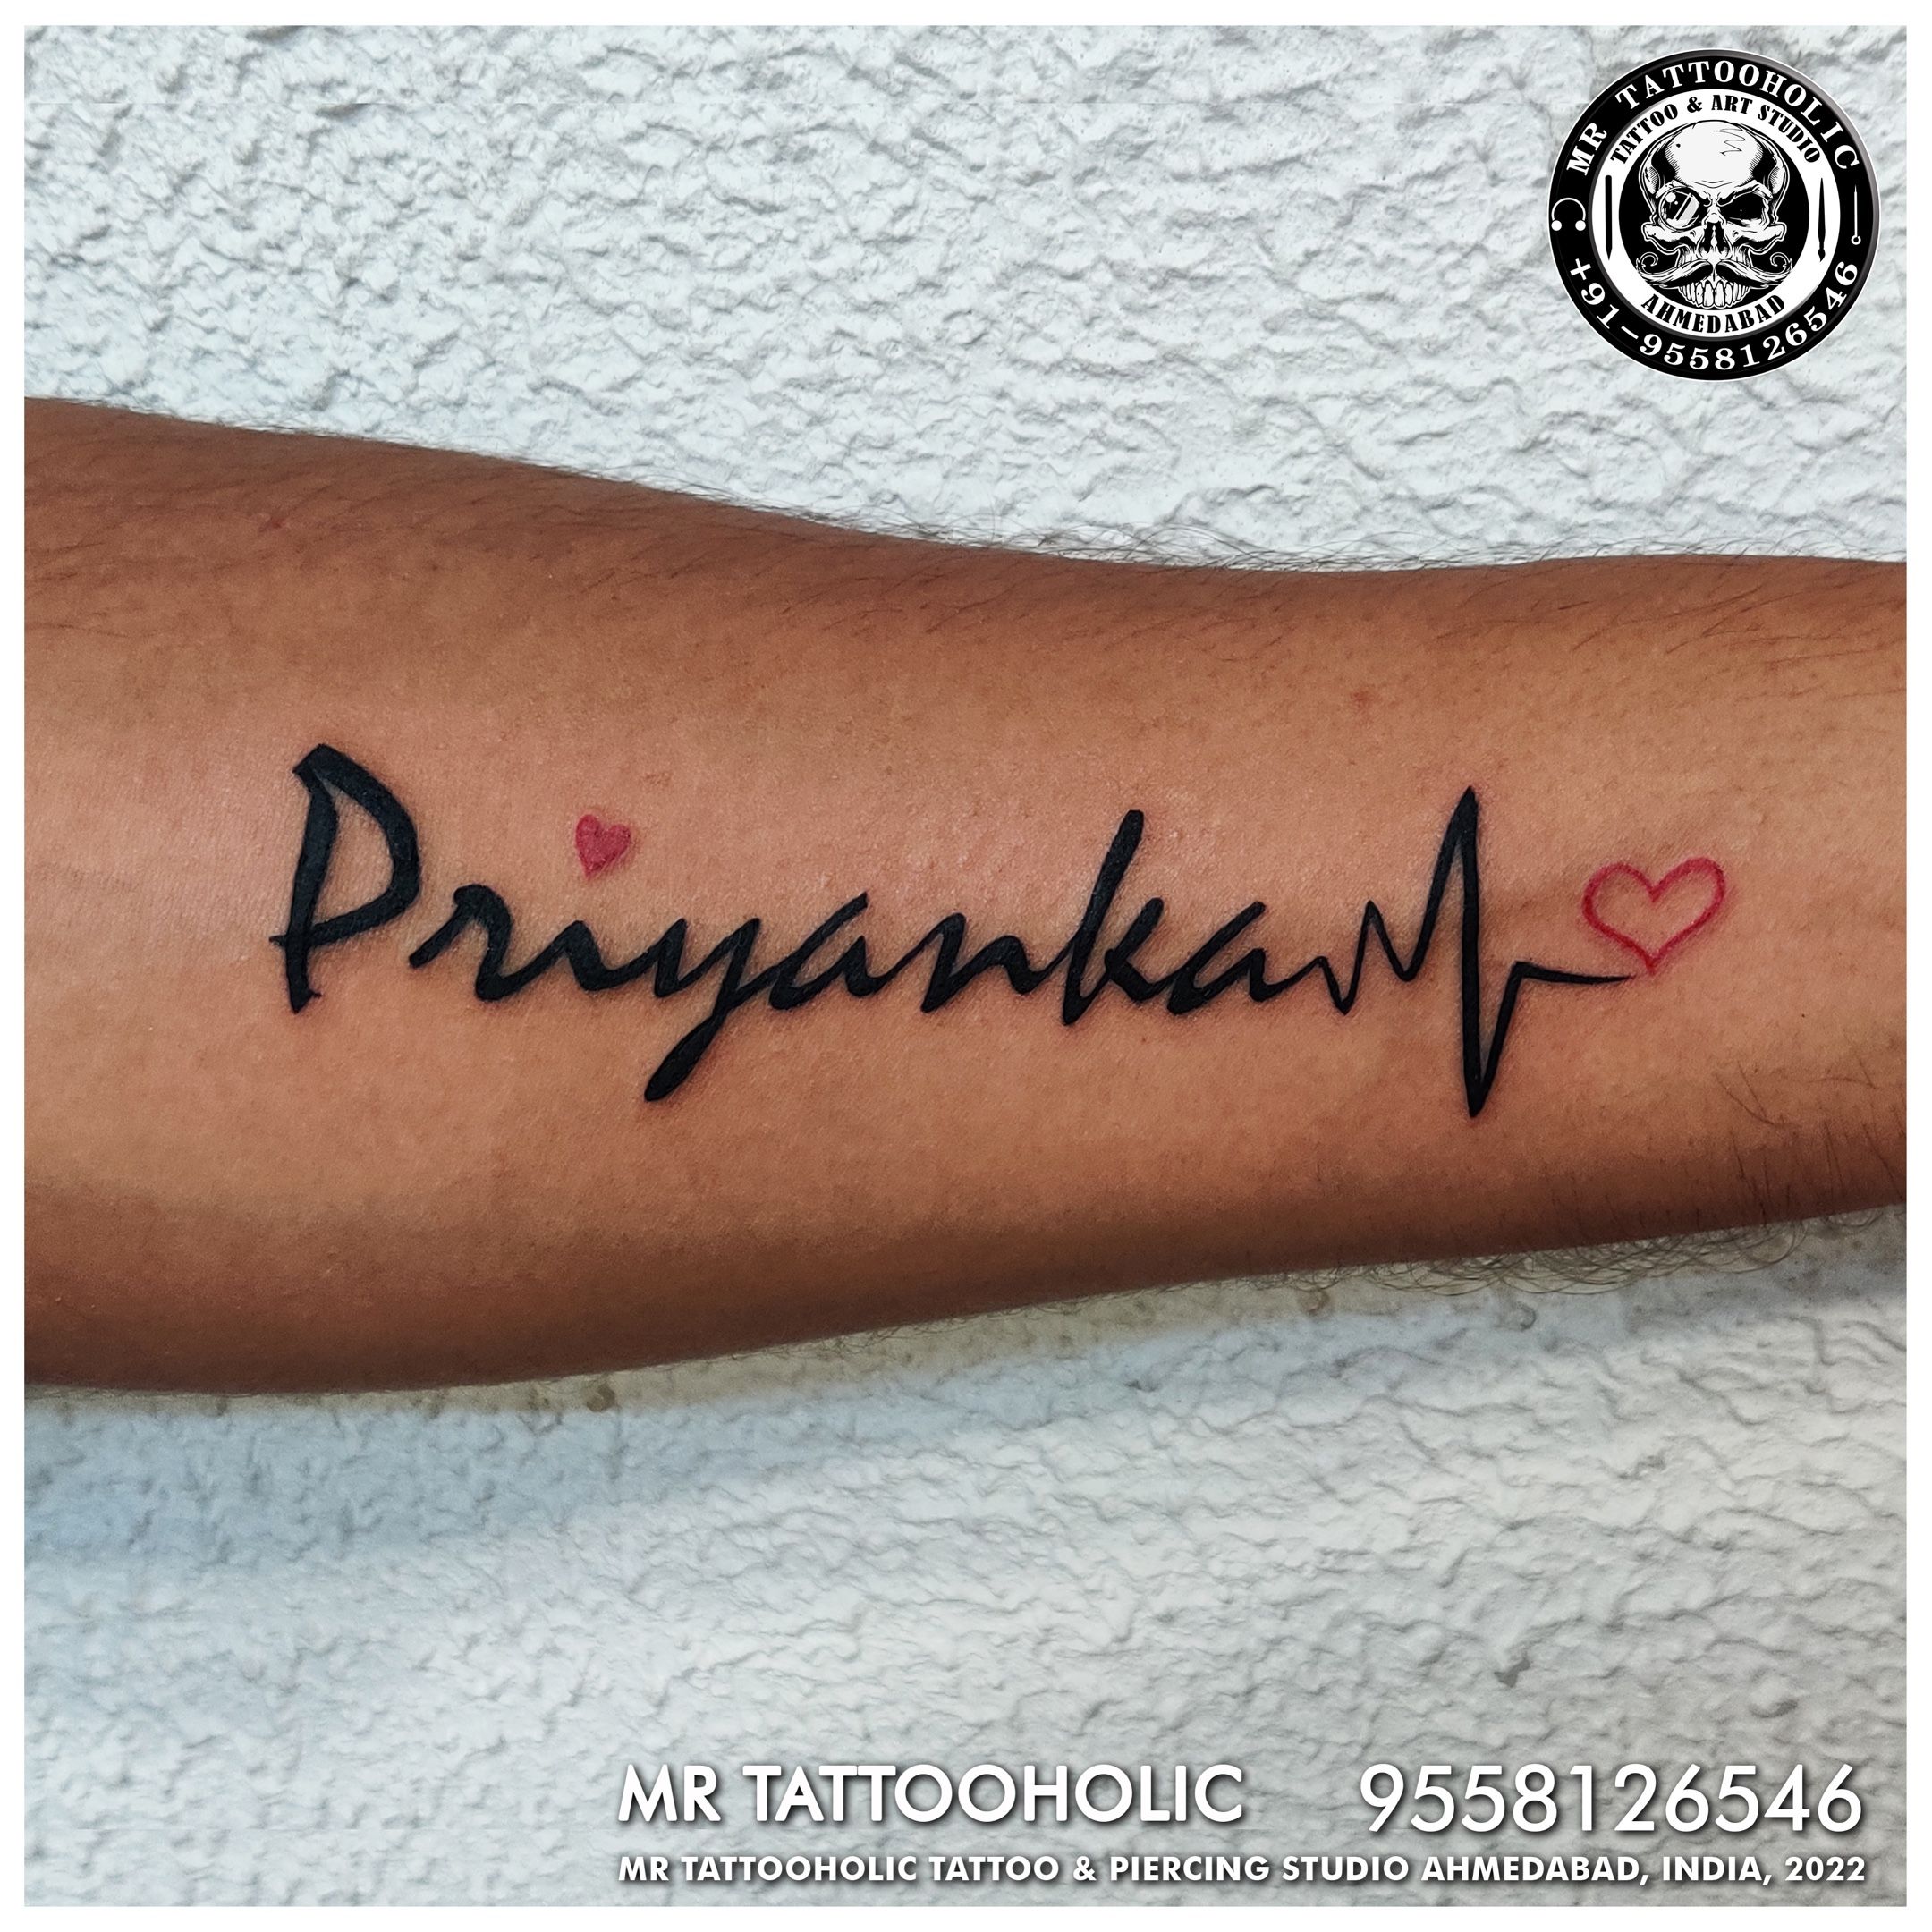 Priyanka name tattoo Priyanka name tattoo design Priyanka name  Name  tattoo designs Name tattoo on hand Name tattoos for moms